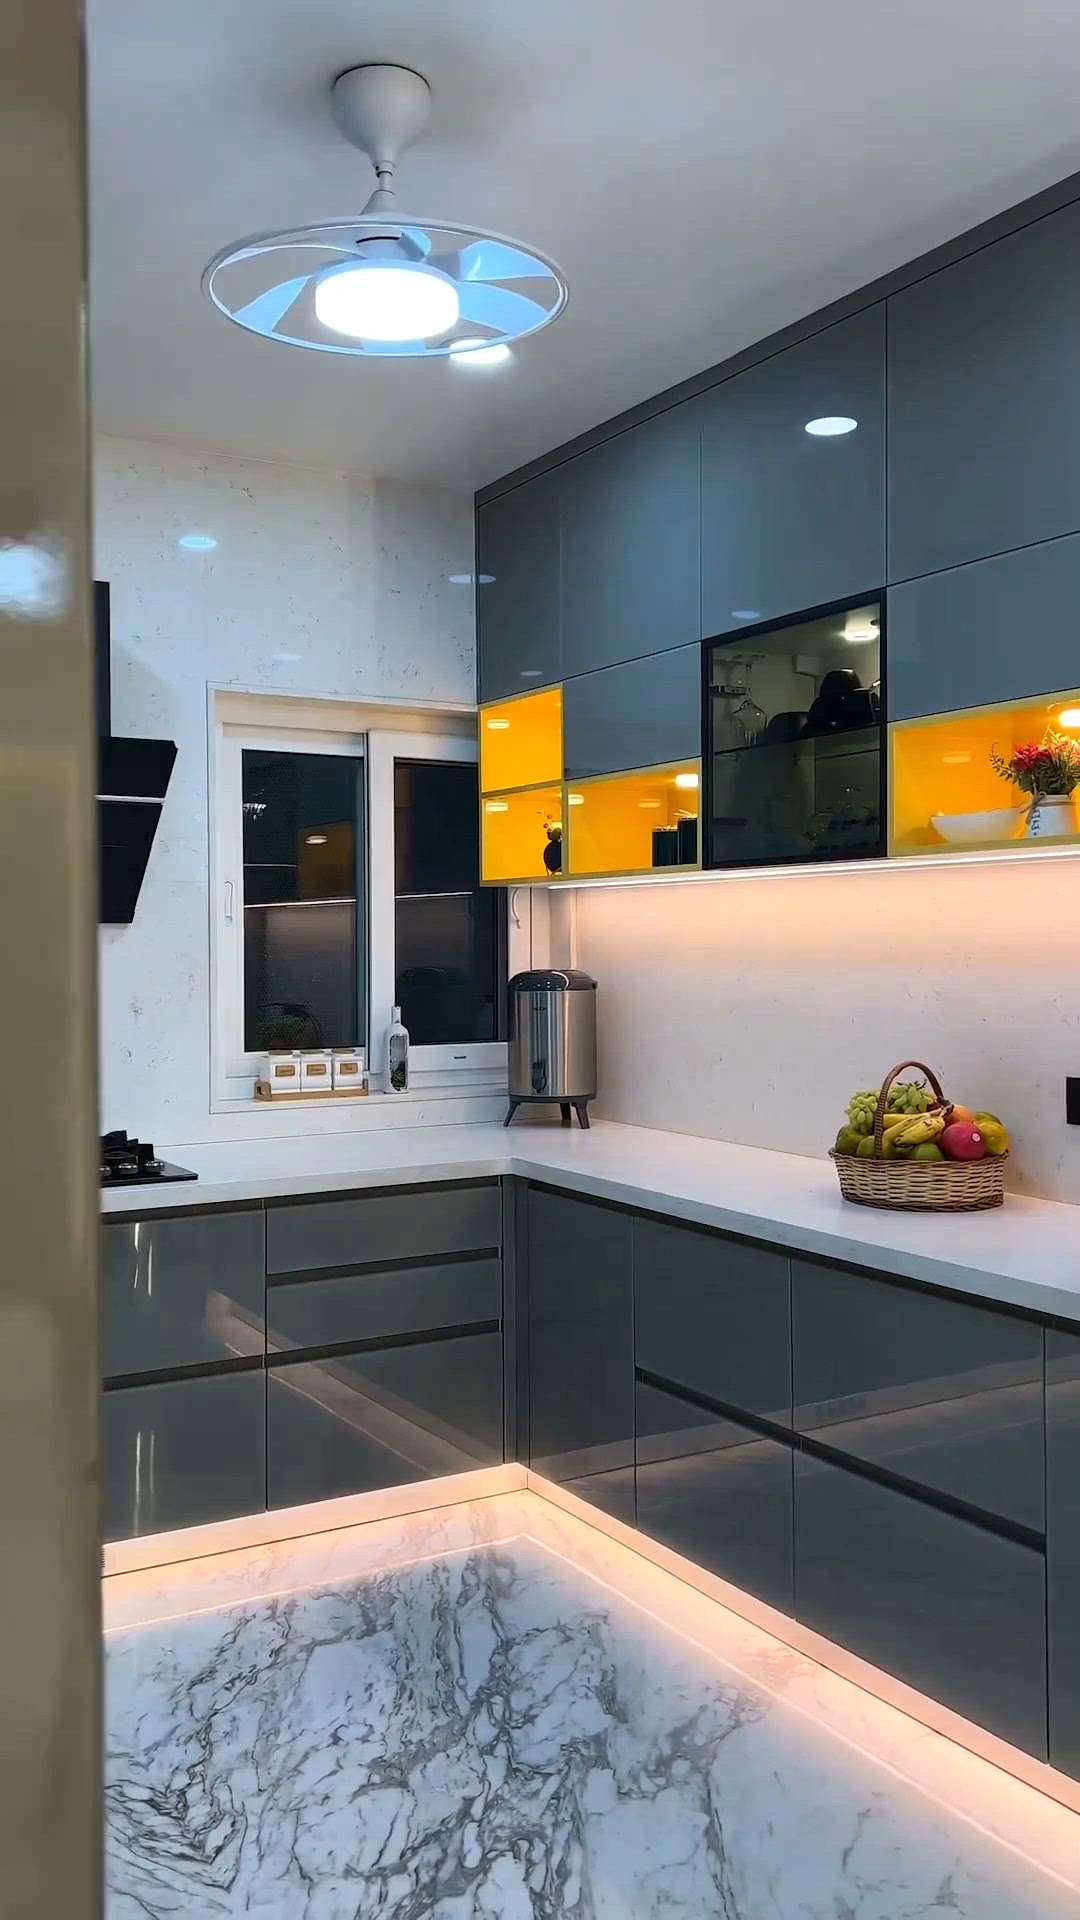 Kitchen Detailing Interior
Ace Solution Helps To Provide You To Make Better Interior Designs
-We Provide Pan India Services
-We Design | Home | Offices | Cafe | Restro
-2D And 3D Plans
-Comment Down Which One Is your Favourite.
-Like, Share With Your Friends.
-Dm For Reasonable Rates.
-For Construction And Home Designs.
-We Do Vastu Work Also.
.
.
#ModularKitchen #HomeDecor #furnished #InteriorDesigner #furniturework